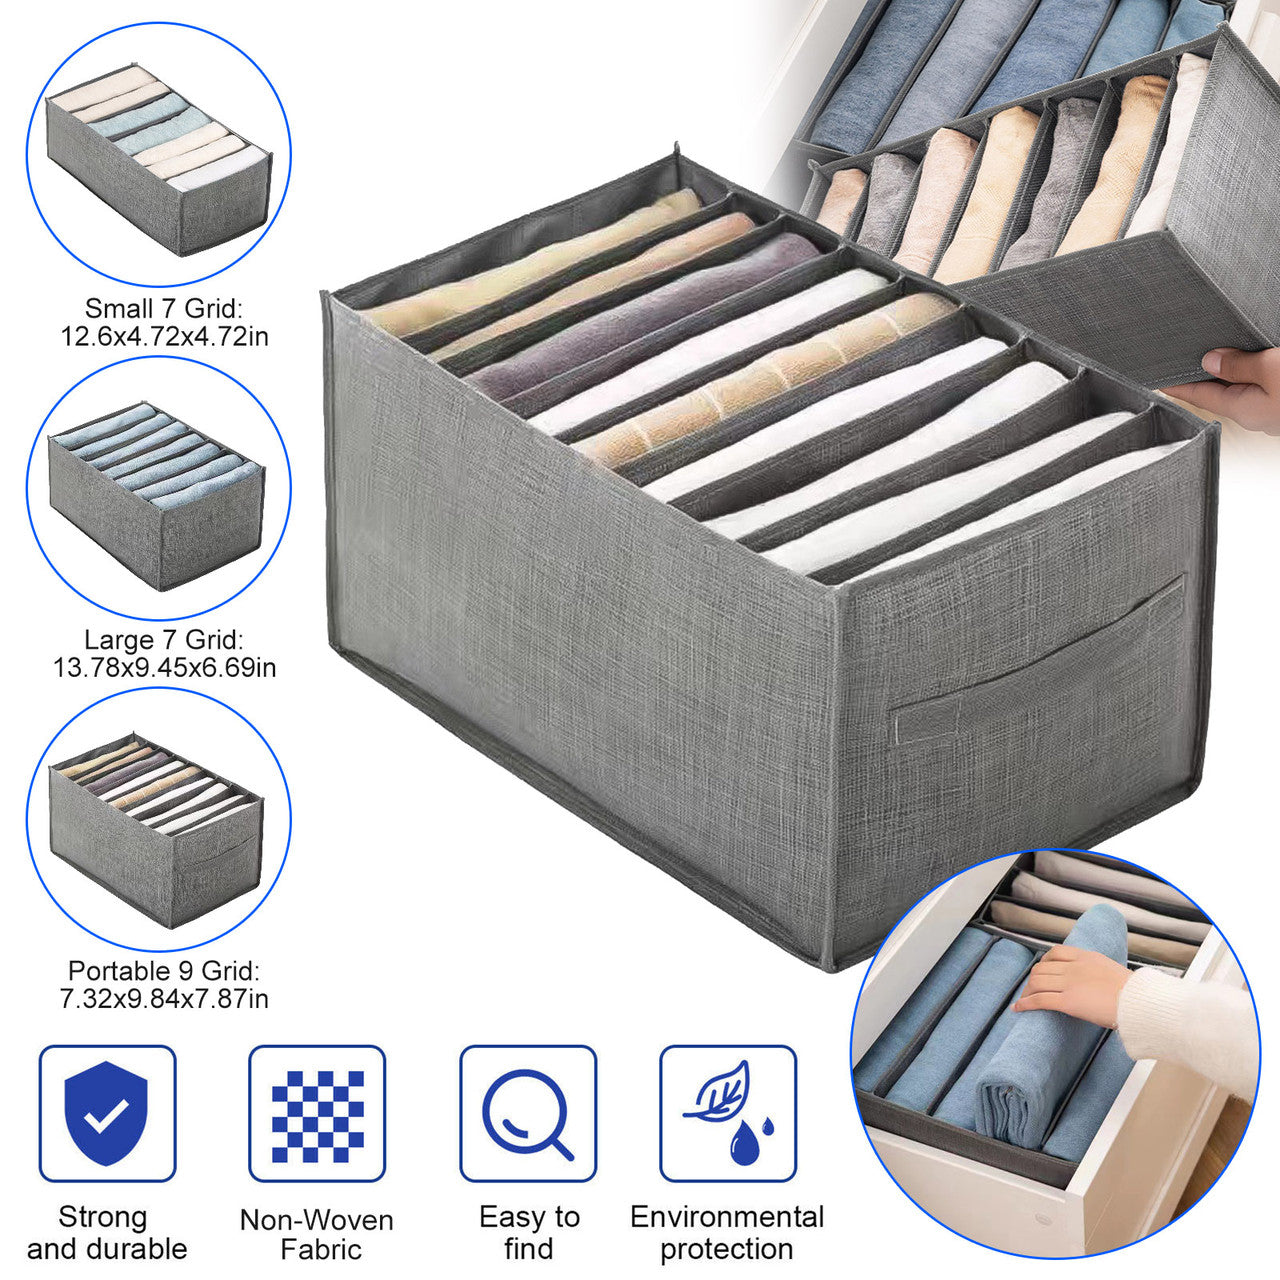 7 Compartment Clothes Storage Organizer - 7 Grids Drawer Organizer Foldable Visible Jeans Storage Compartment Closet Storage Space (Gray)